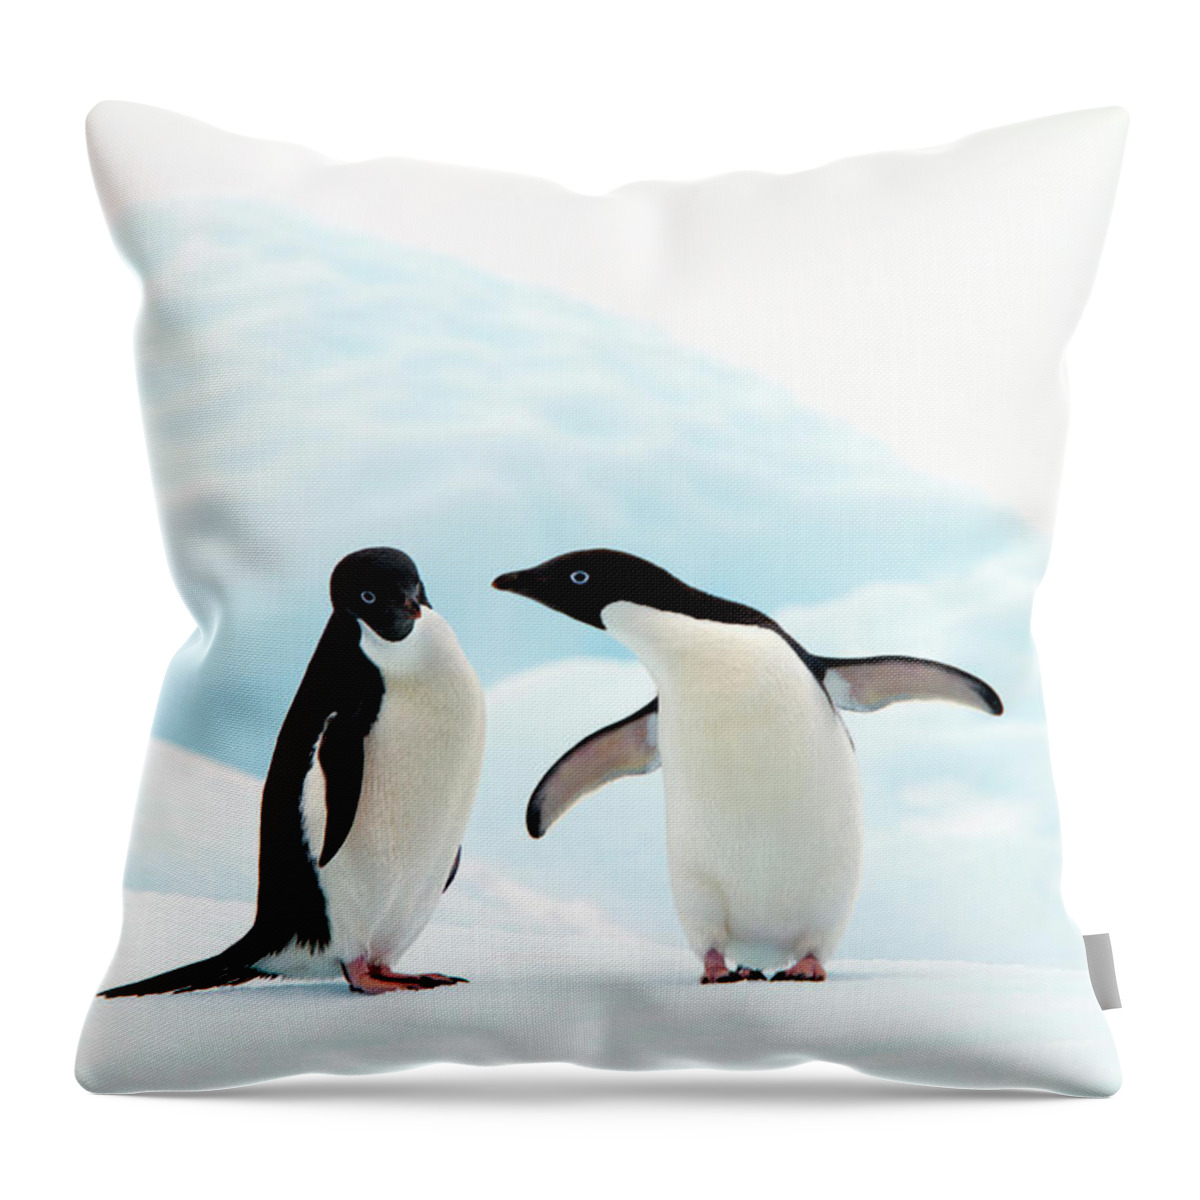 Animal Themes Throw Pillow featuring the photograph Adélie Penguins by Angelika Stern